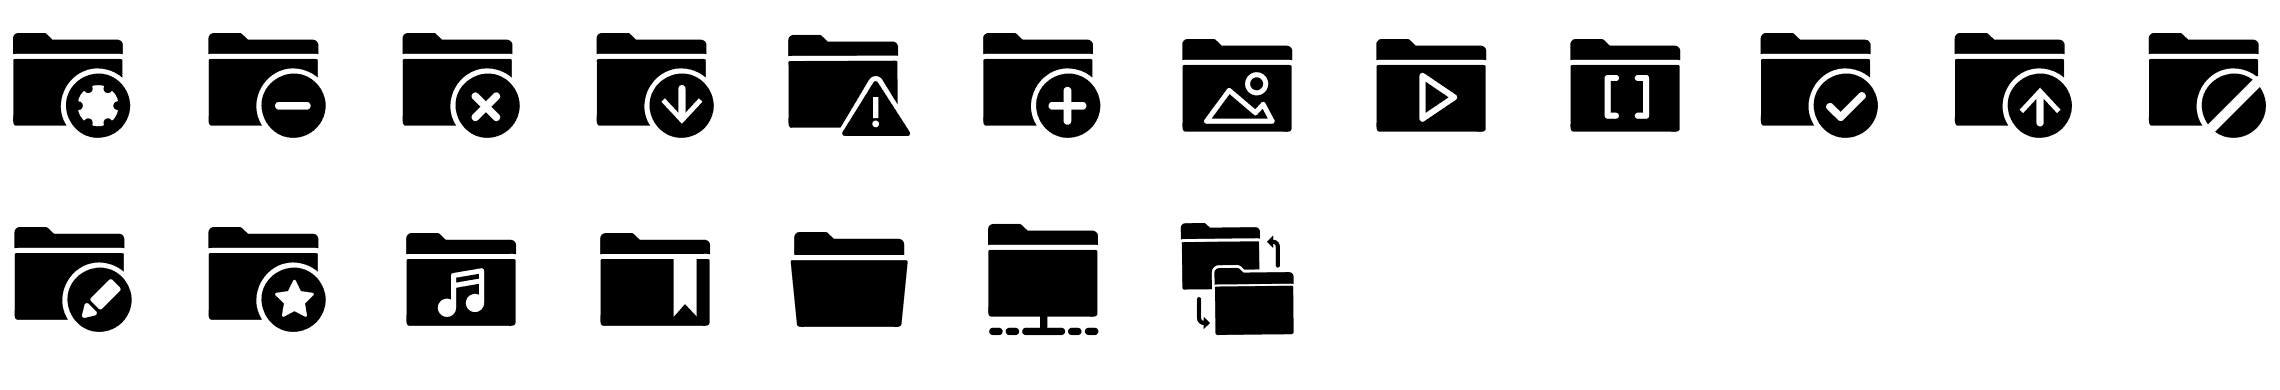 folders-glyph-icons-preview